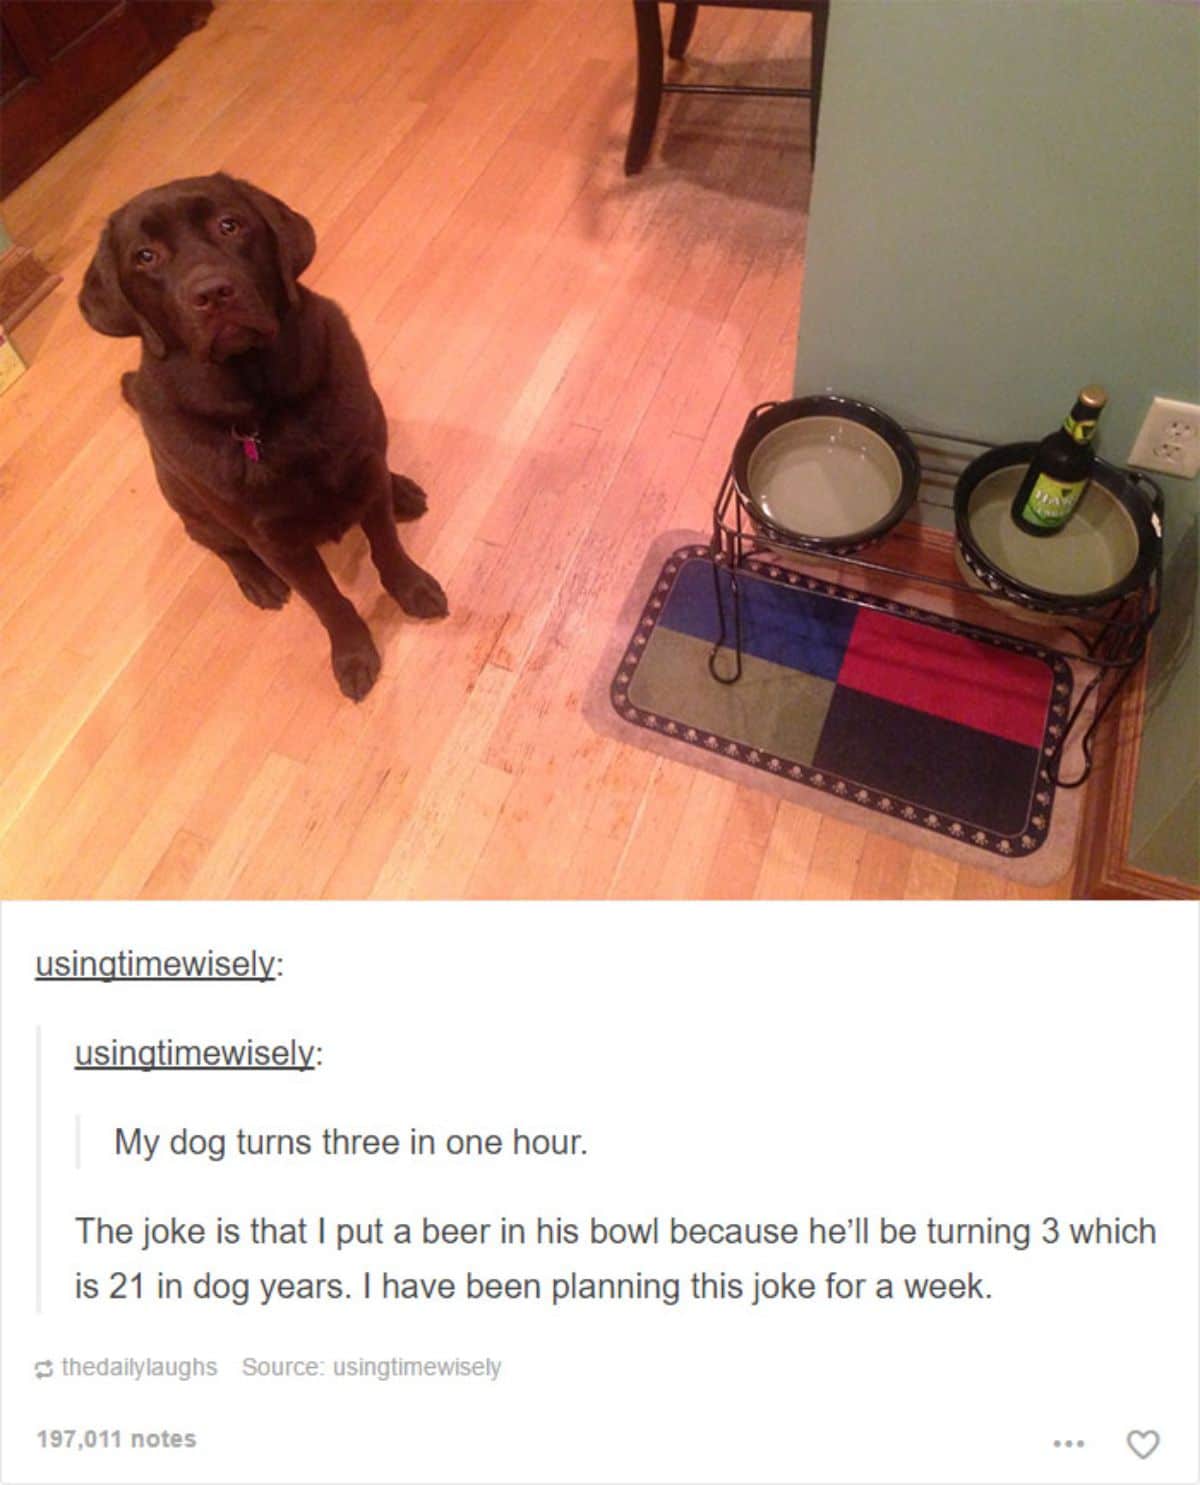 chocolate labrador retriever sitting down next to its empty food bowl and a bowl with a green bottle of beer in it